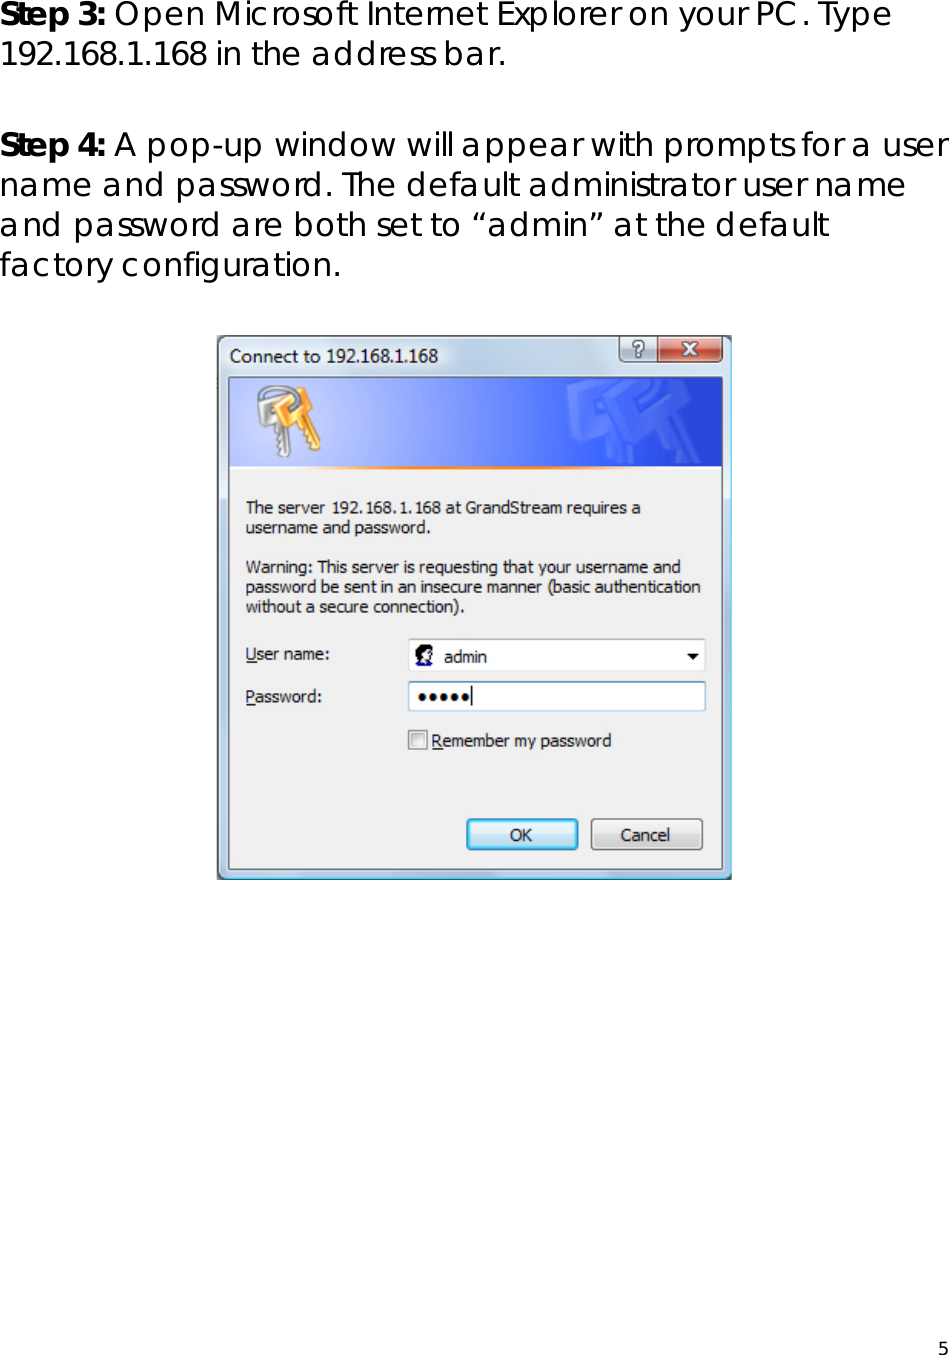  5 Step 3: Open Microsoft Internet Explorer on your PC. Type 192.168.1.168 in the address bar.  Step 4: A pop-up window will appear with prompts for a user name and password. The default administrator user name and password are both set to “admin” at the default factory configuration.           